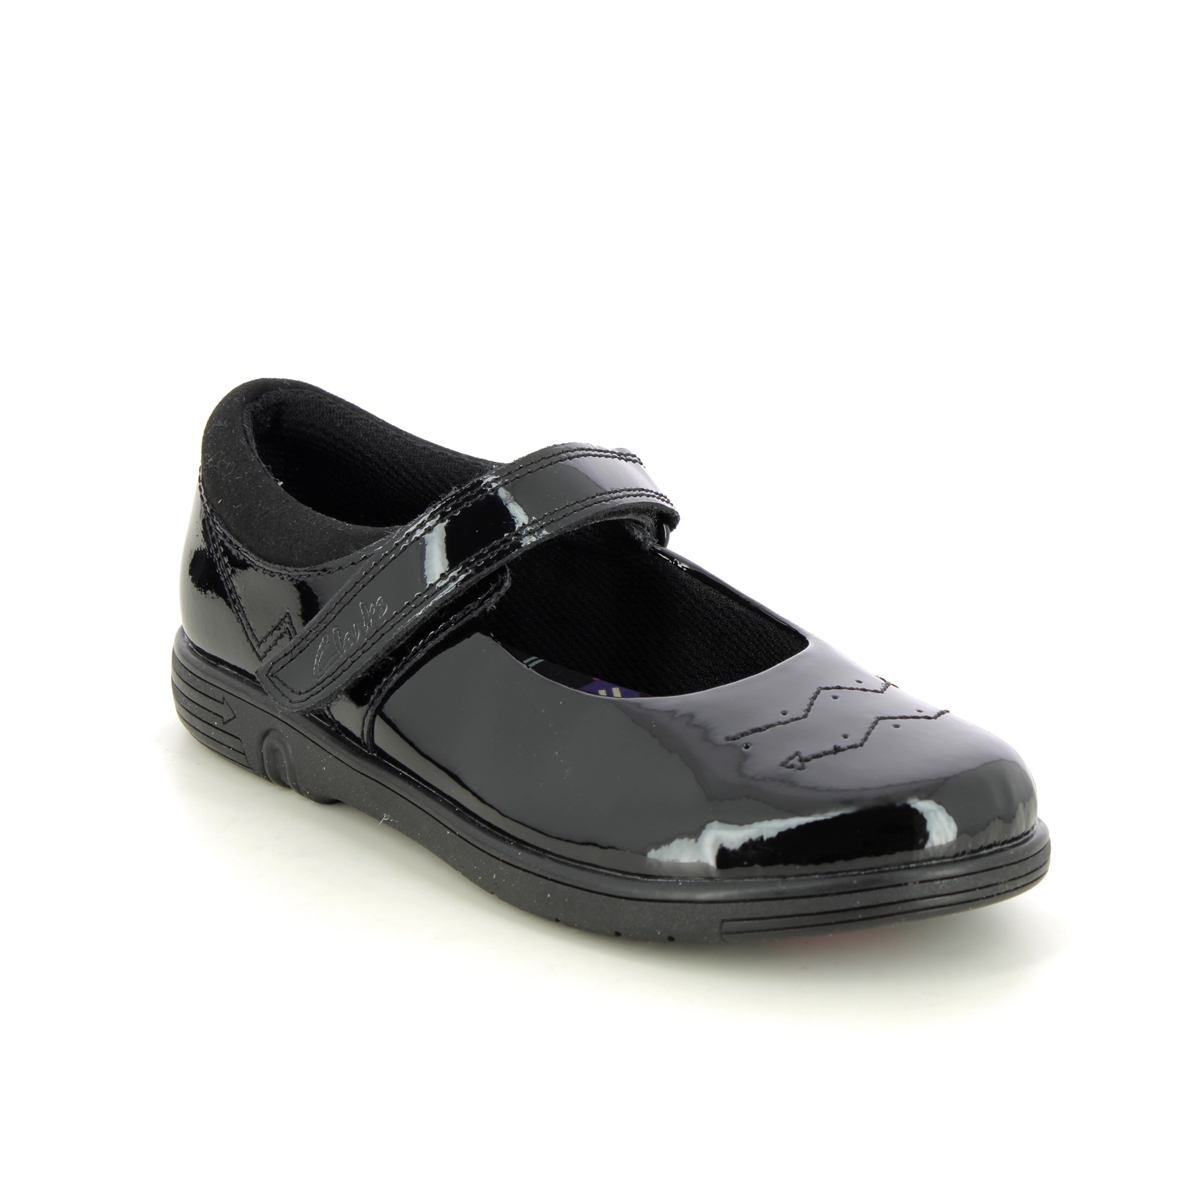 Clarks Jazzy Jig K Mary Jane Black Patent Kids Girls School Shoes 753087G In Size 12.5 In Plain Black Patent G Width Fitting For School For kids